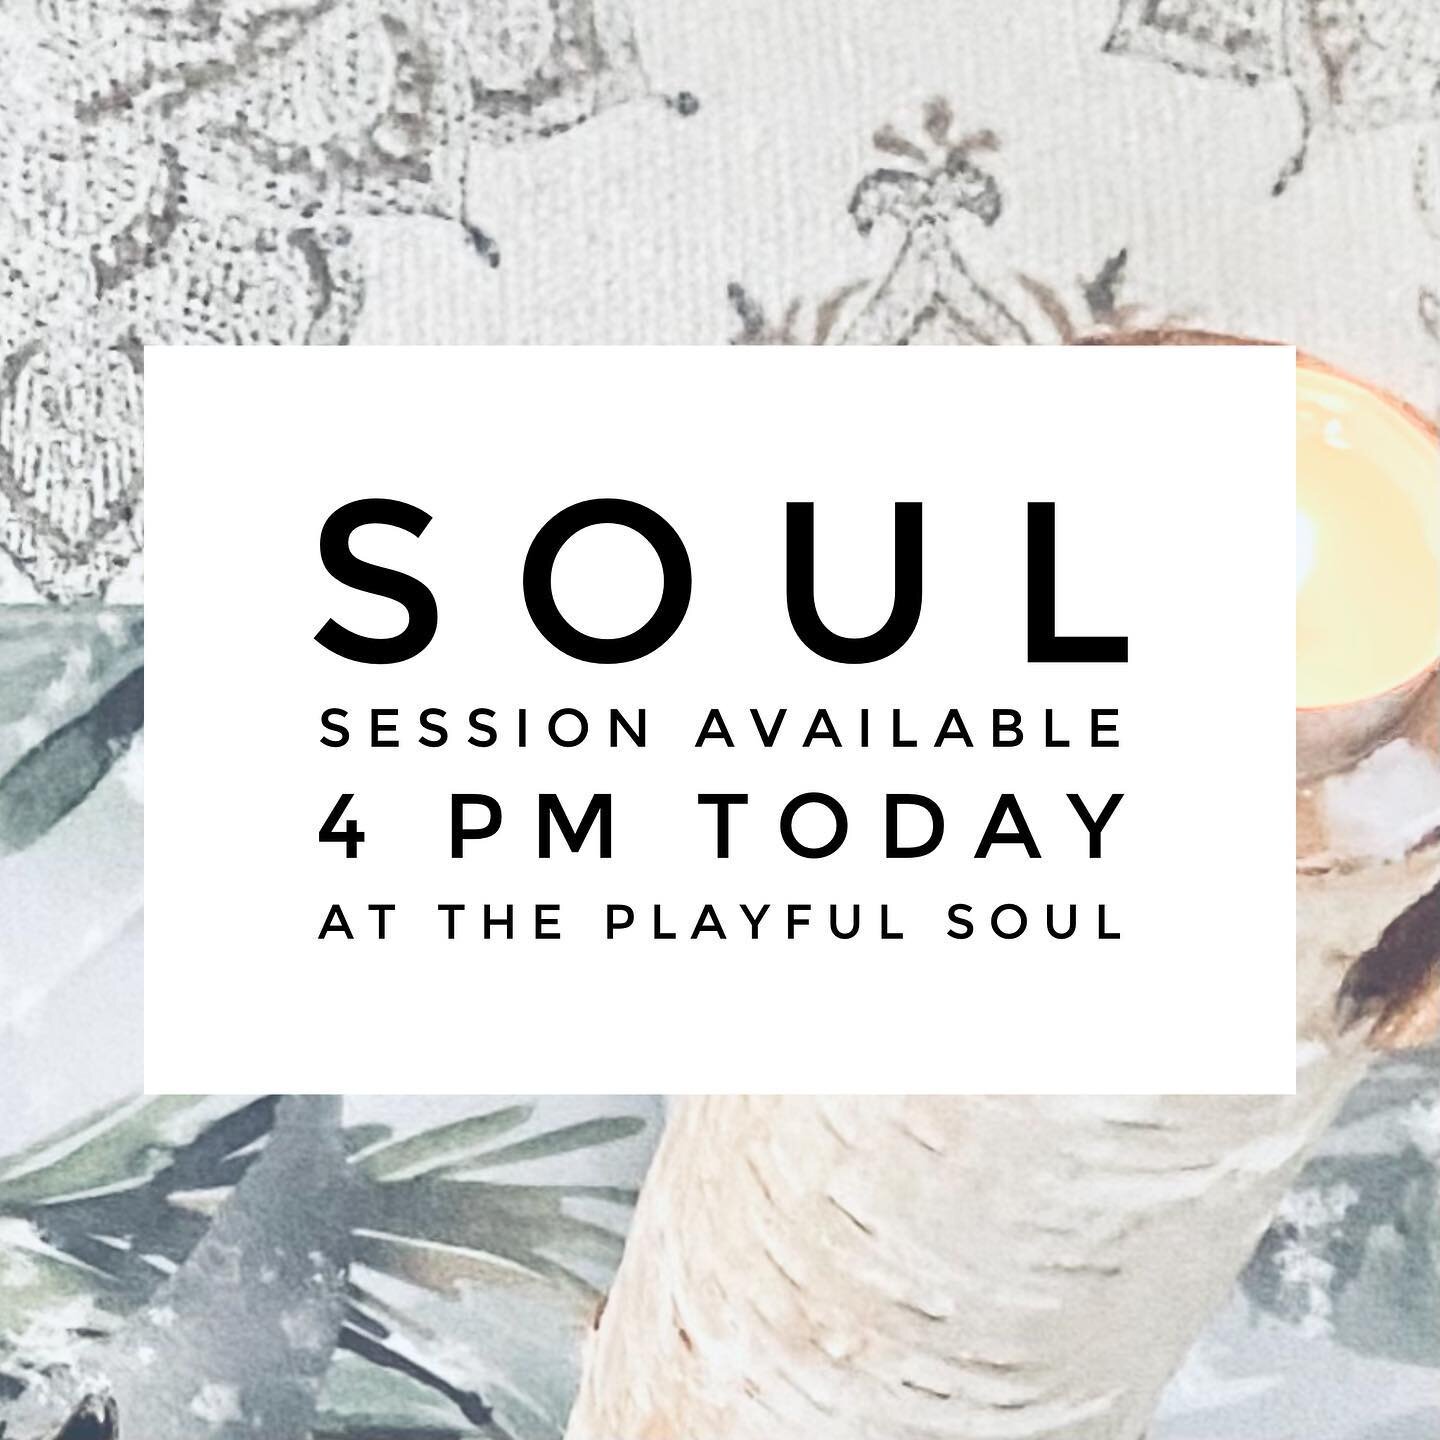 I&rsquo;ll be at @the_playful_soul today and have an opening at 4:00 for a soul session 🌬️💙 We can book 30, 60 or 90 minutes together. Whatever kind of hug for your soul you need! DM me or call 317-253-0499 to book! 🥰 Happy Sunday Everyone! 👐☀️👐